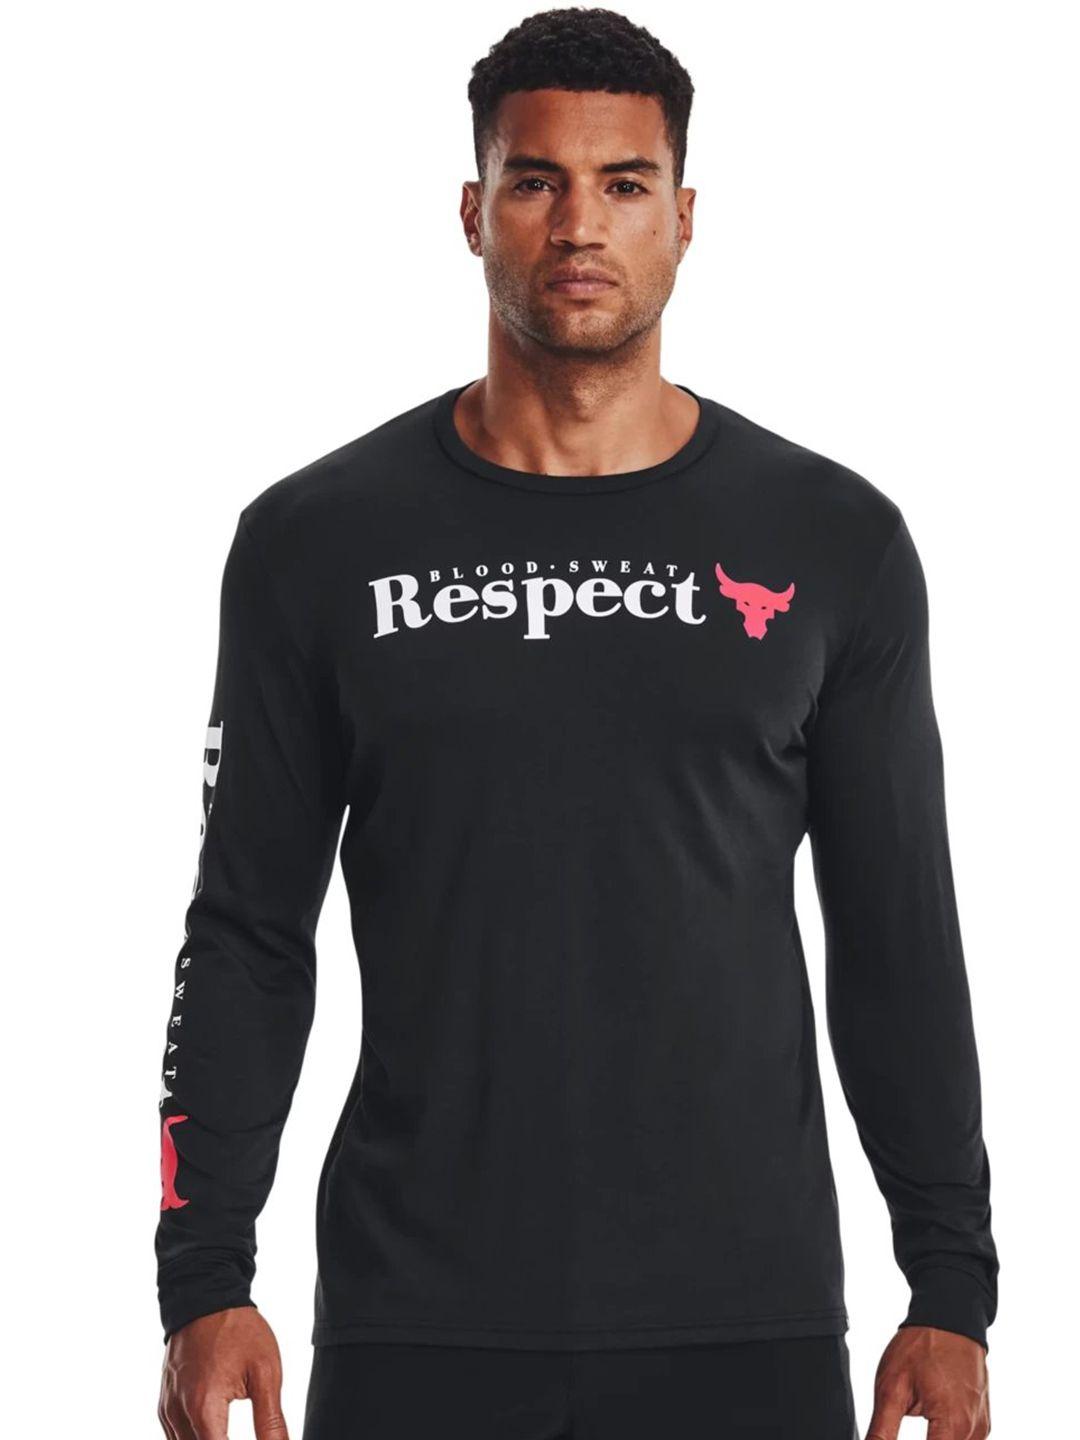 under armour rock respect typographic printed relaxed fit training t-shirt